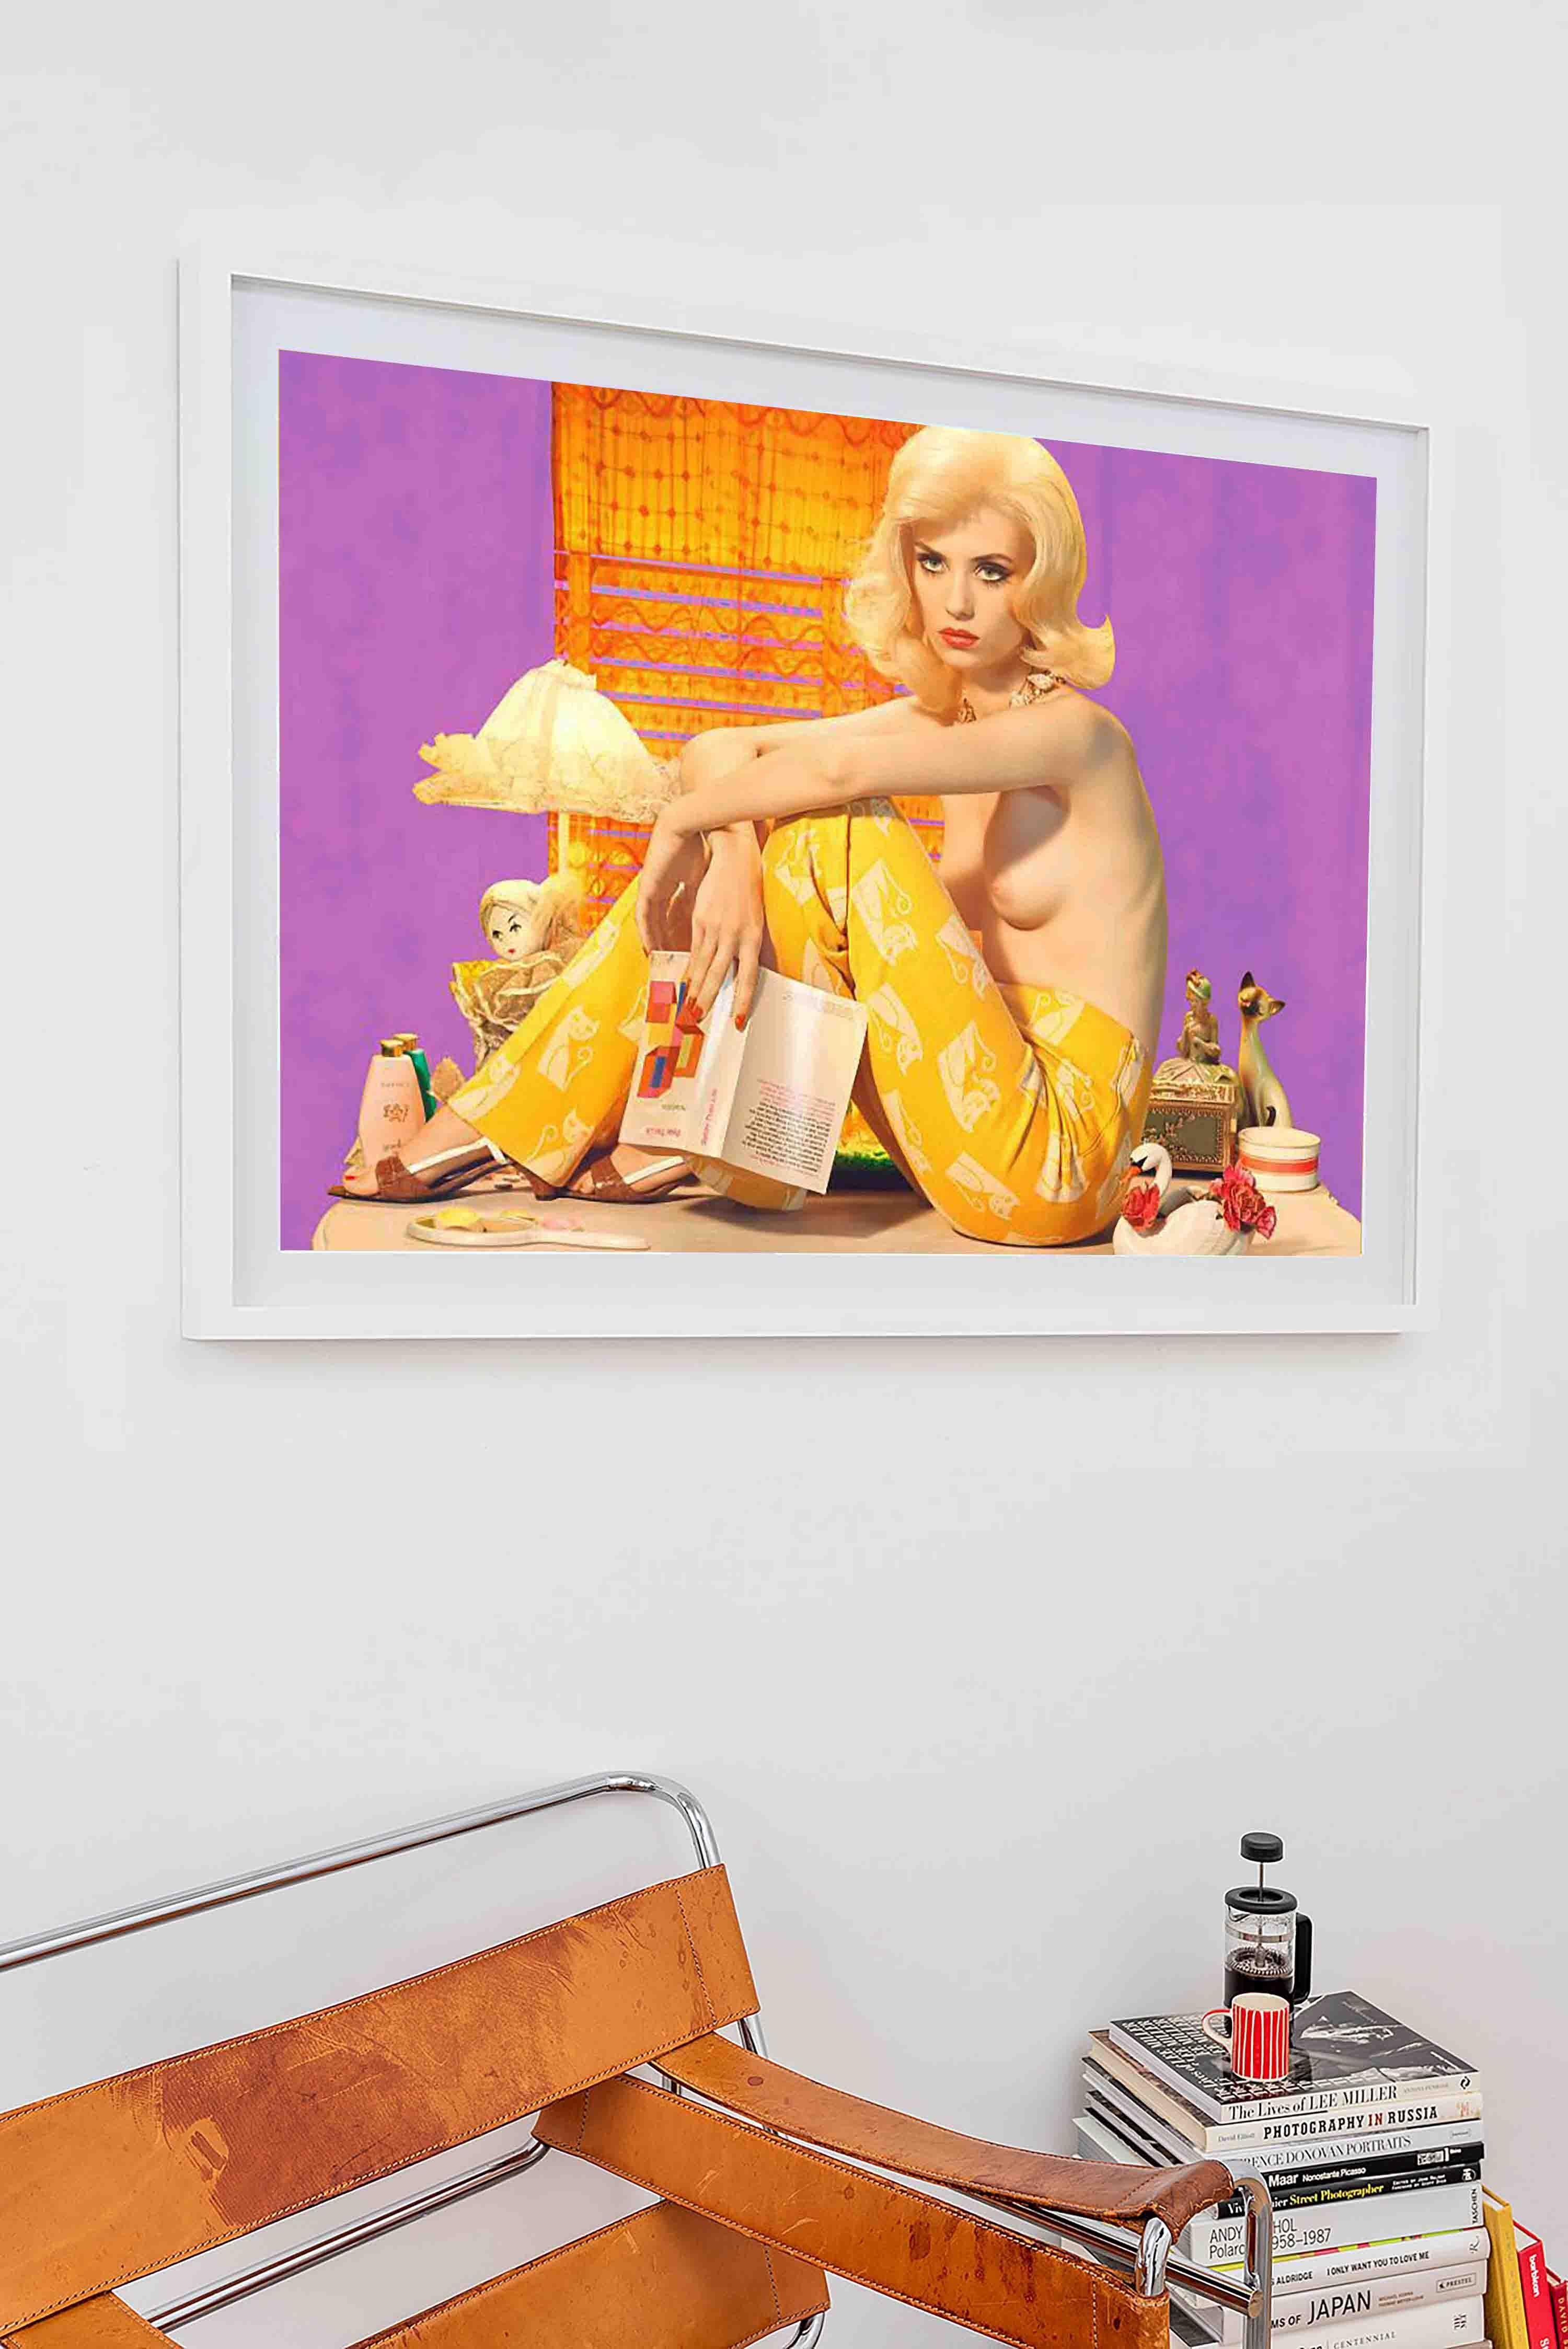 Better Than Life (After Miller), 2017 - Miles Aldridge (Colour Photography)
Signed and numbered in pencil verso
Screenprint in colours
29 1/2 x 40 1/2 inches
Edition of 15 

Miles Aldridge (born 1964) is one of Britain’s most celebrated fashion